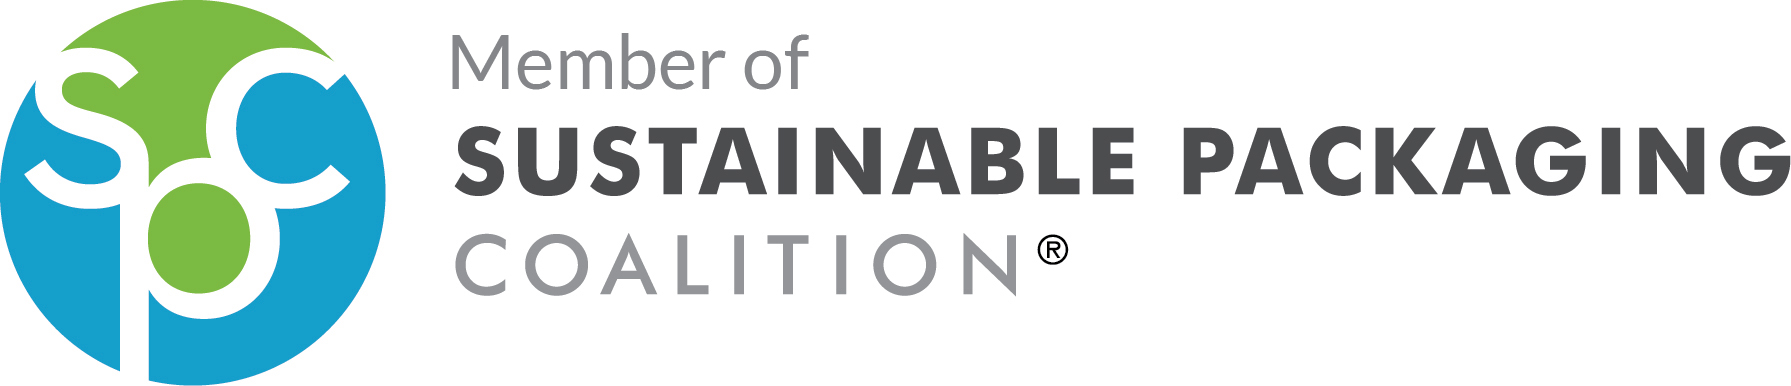 Sustainable Packaging Coalition Membership